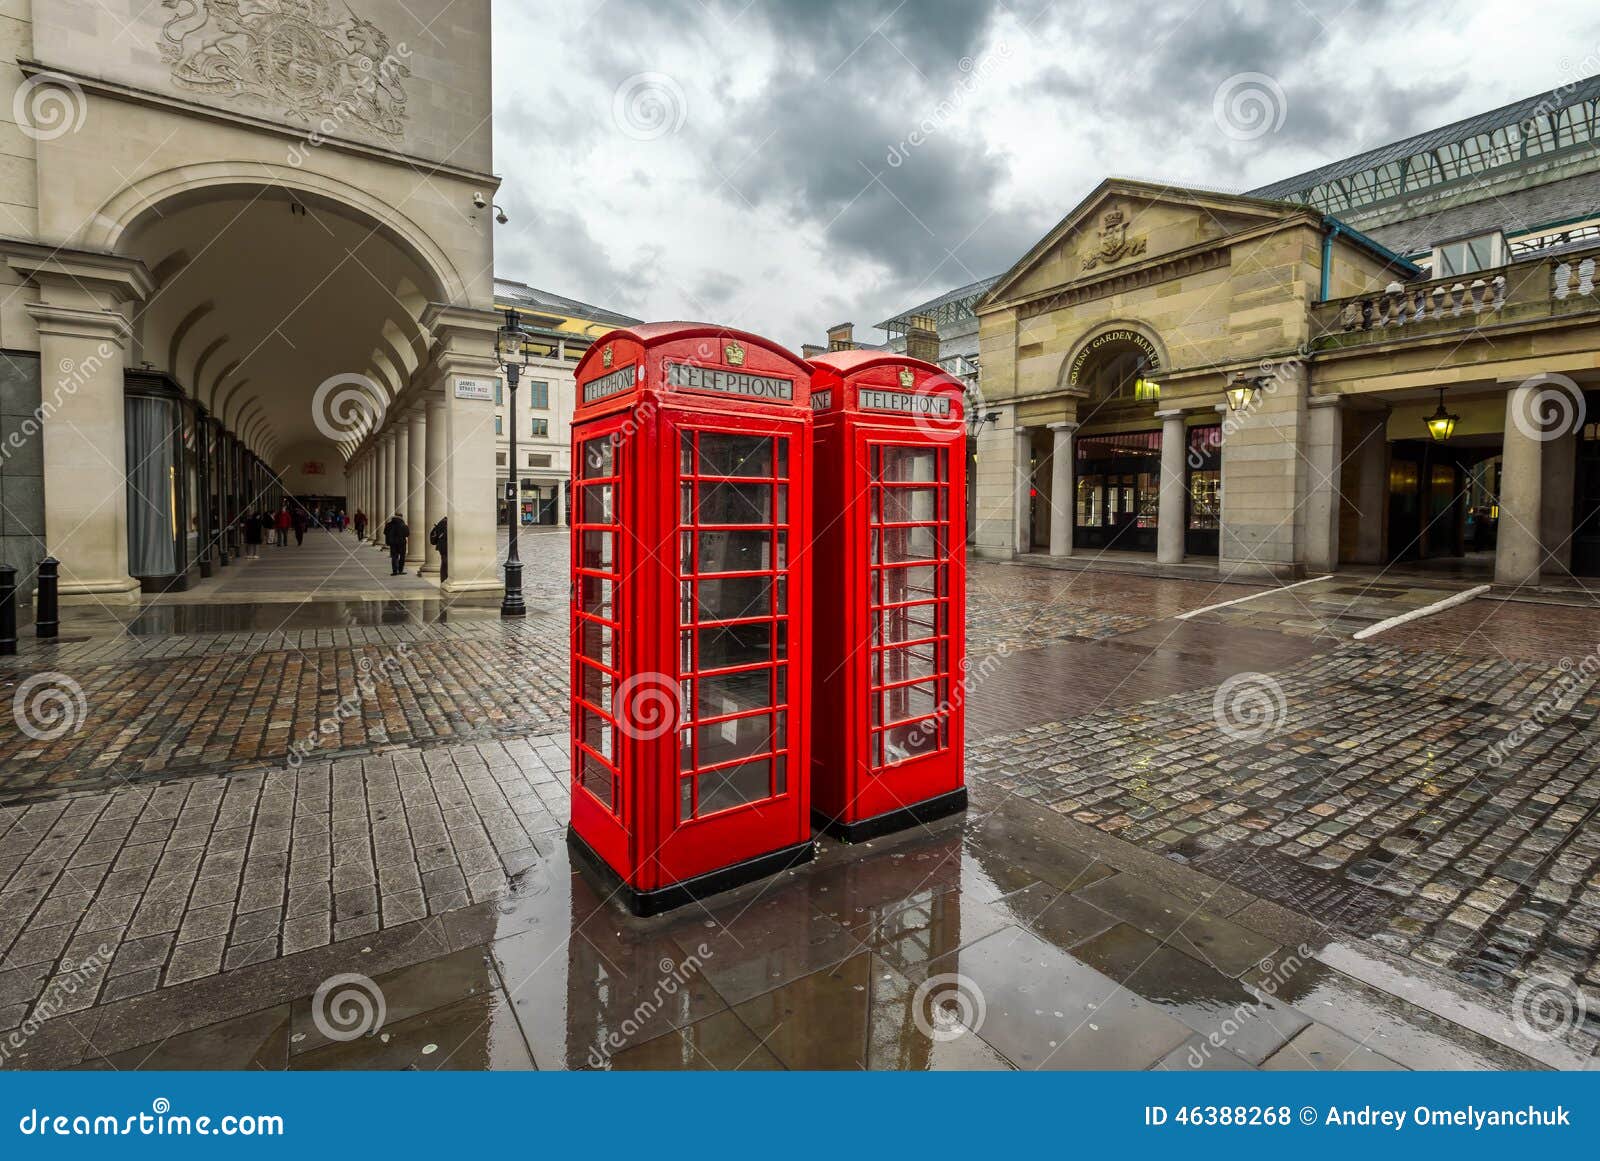 red telephone box at covent garden market on rainy day